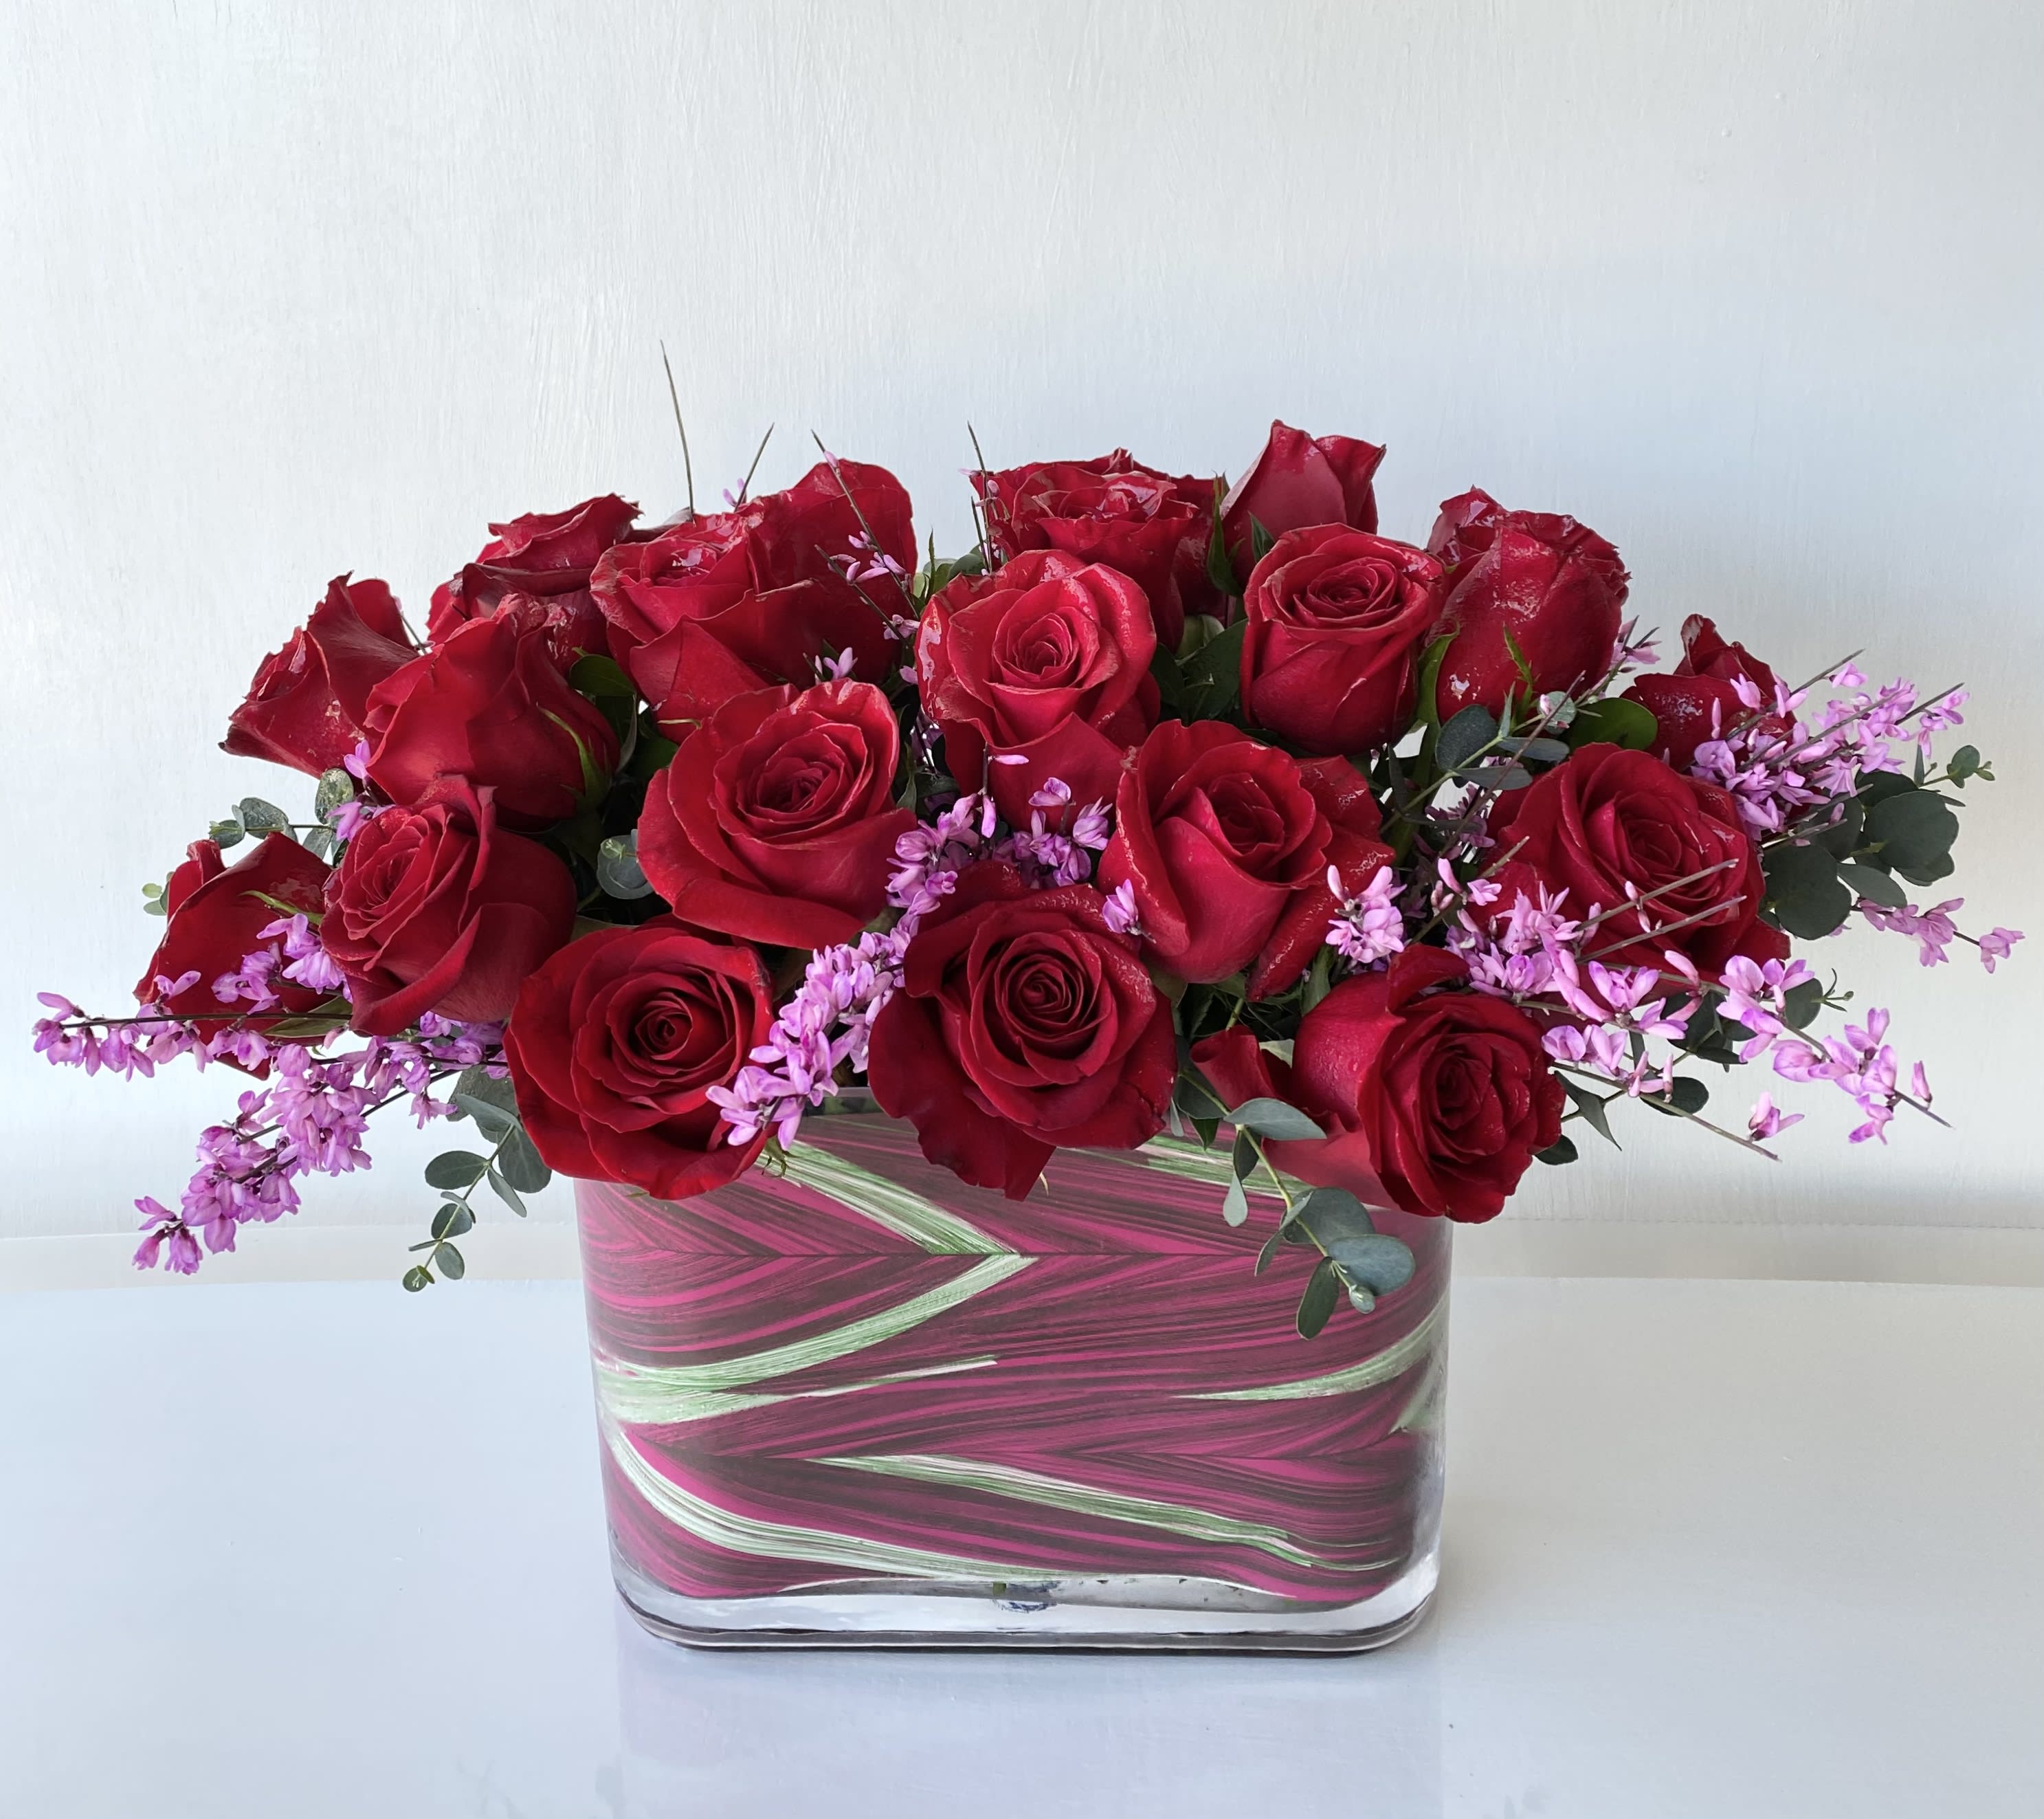 Love &amp; Happiness - An arrangement of 24 short-stemmed high-quality red roses in a 7.5&quot; by 10&quot; rectangular glass vase. Covered with a decorative faux greenery-pink liner standing at 15&quot; tall x 18&quot; wide.